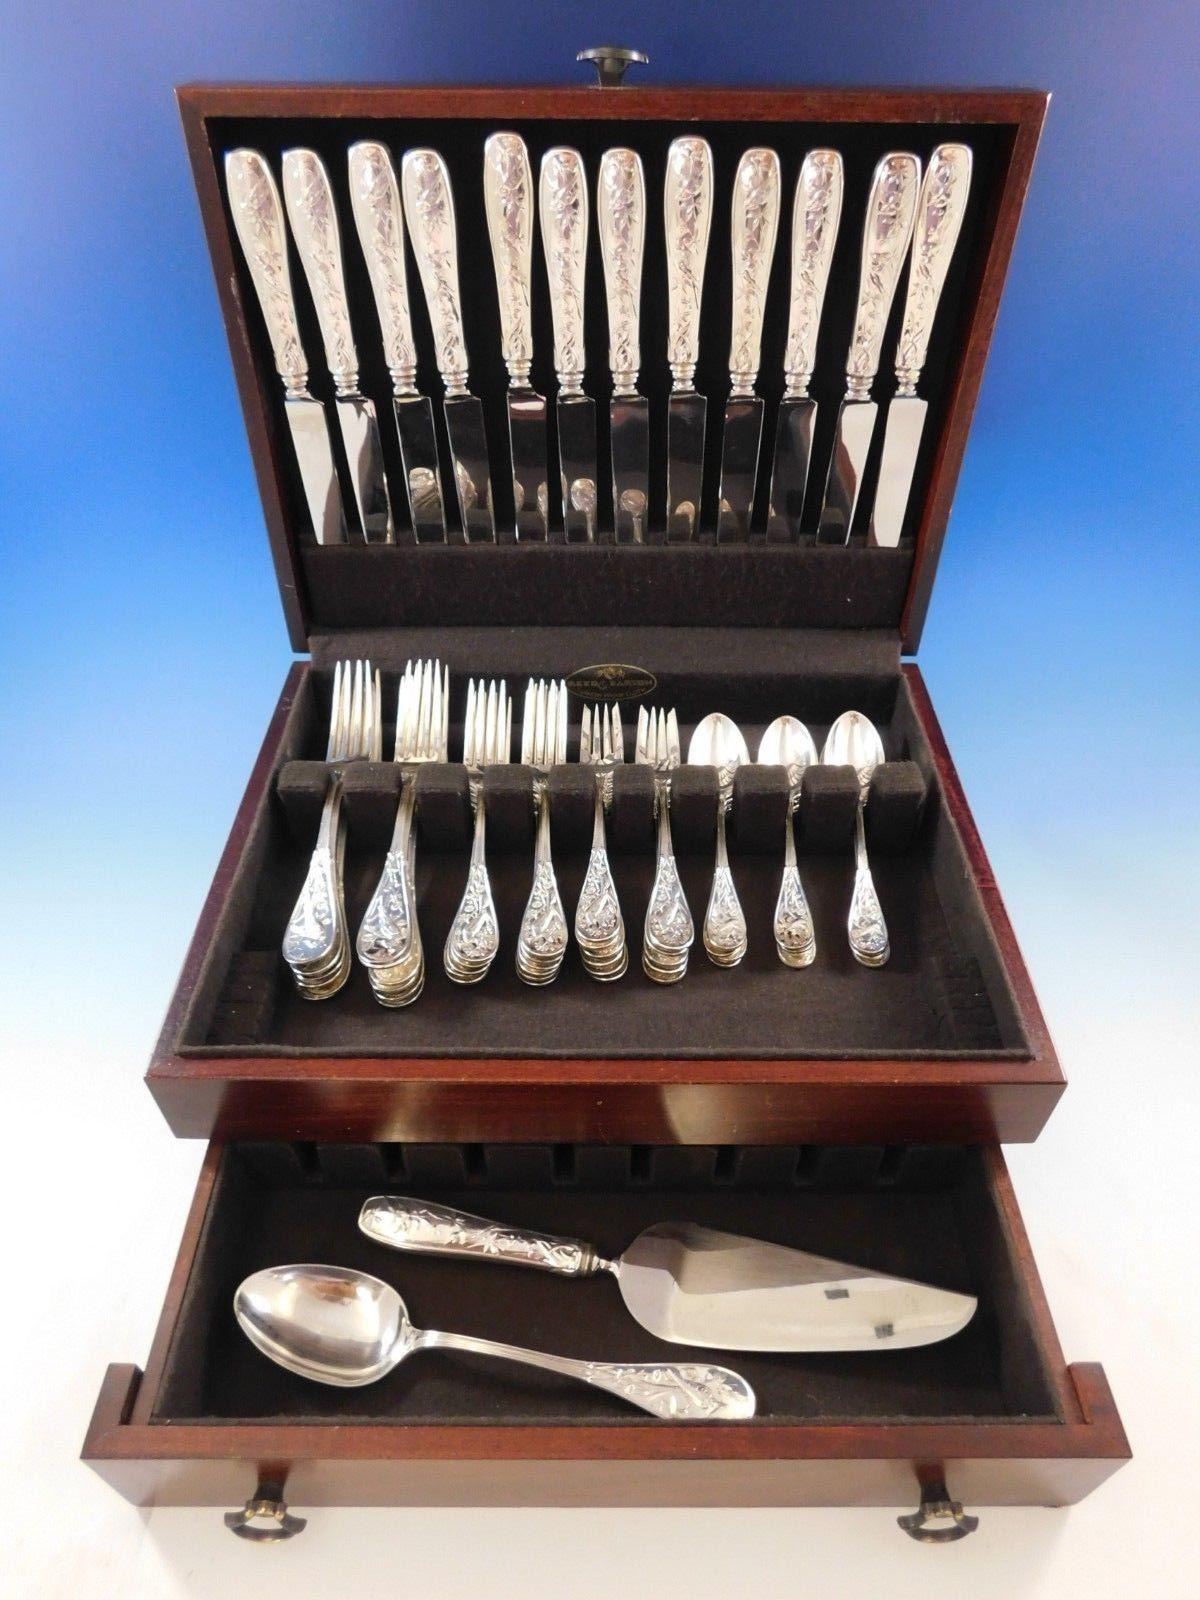 Masterfully crafted dinner size Audubon by Tiffany & Co. sterling silver flatware set of 62 pieces. This set includes:

12 dinner knives, 10 1/4